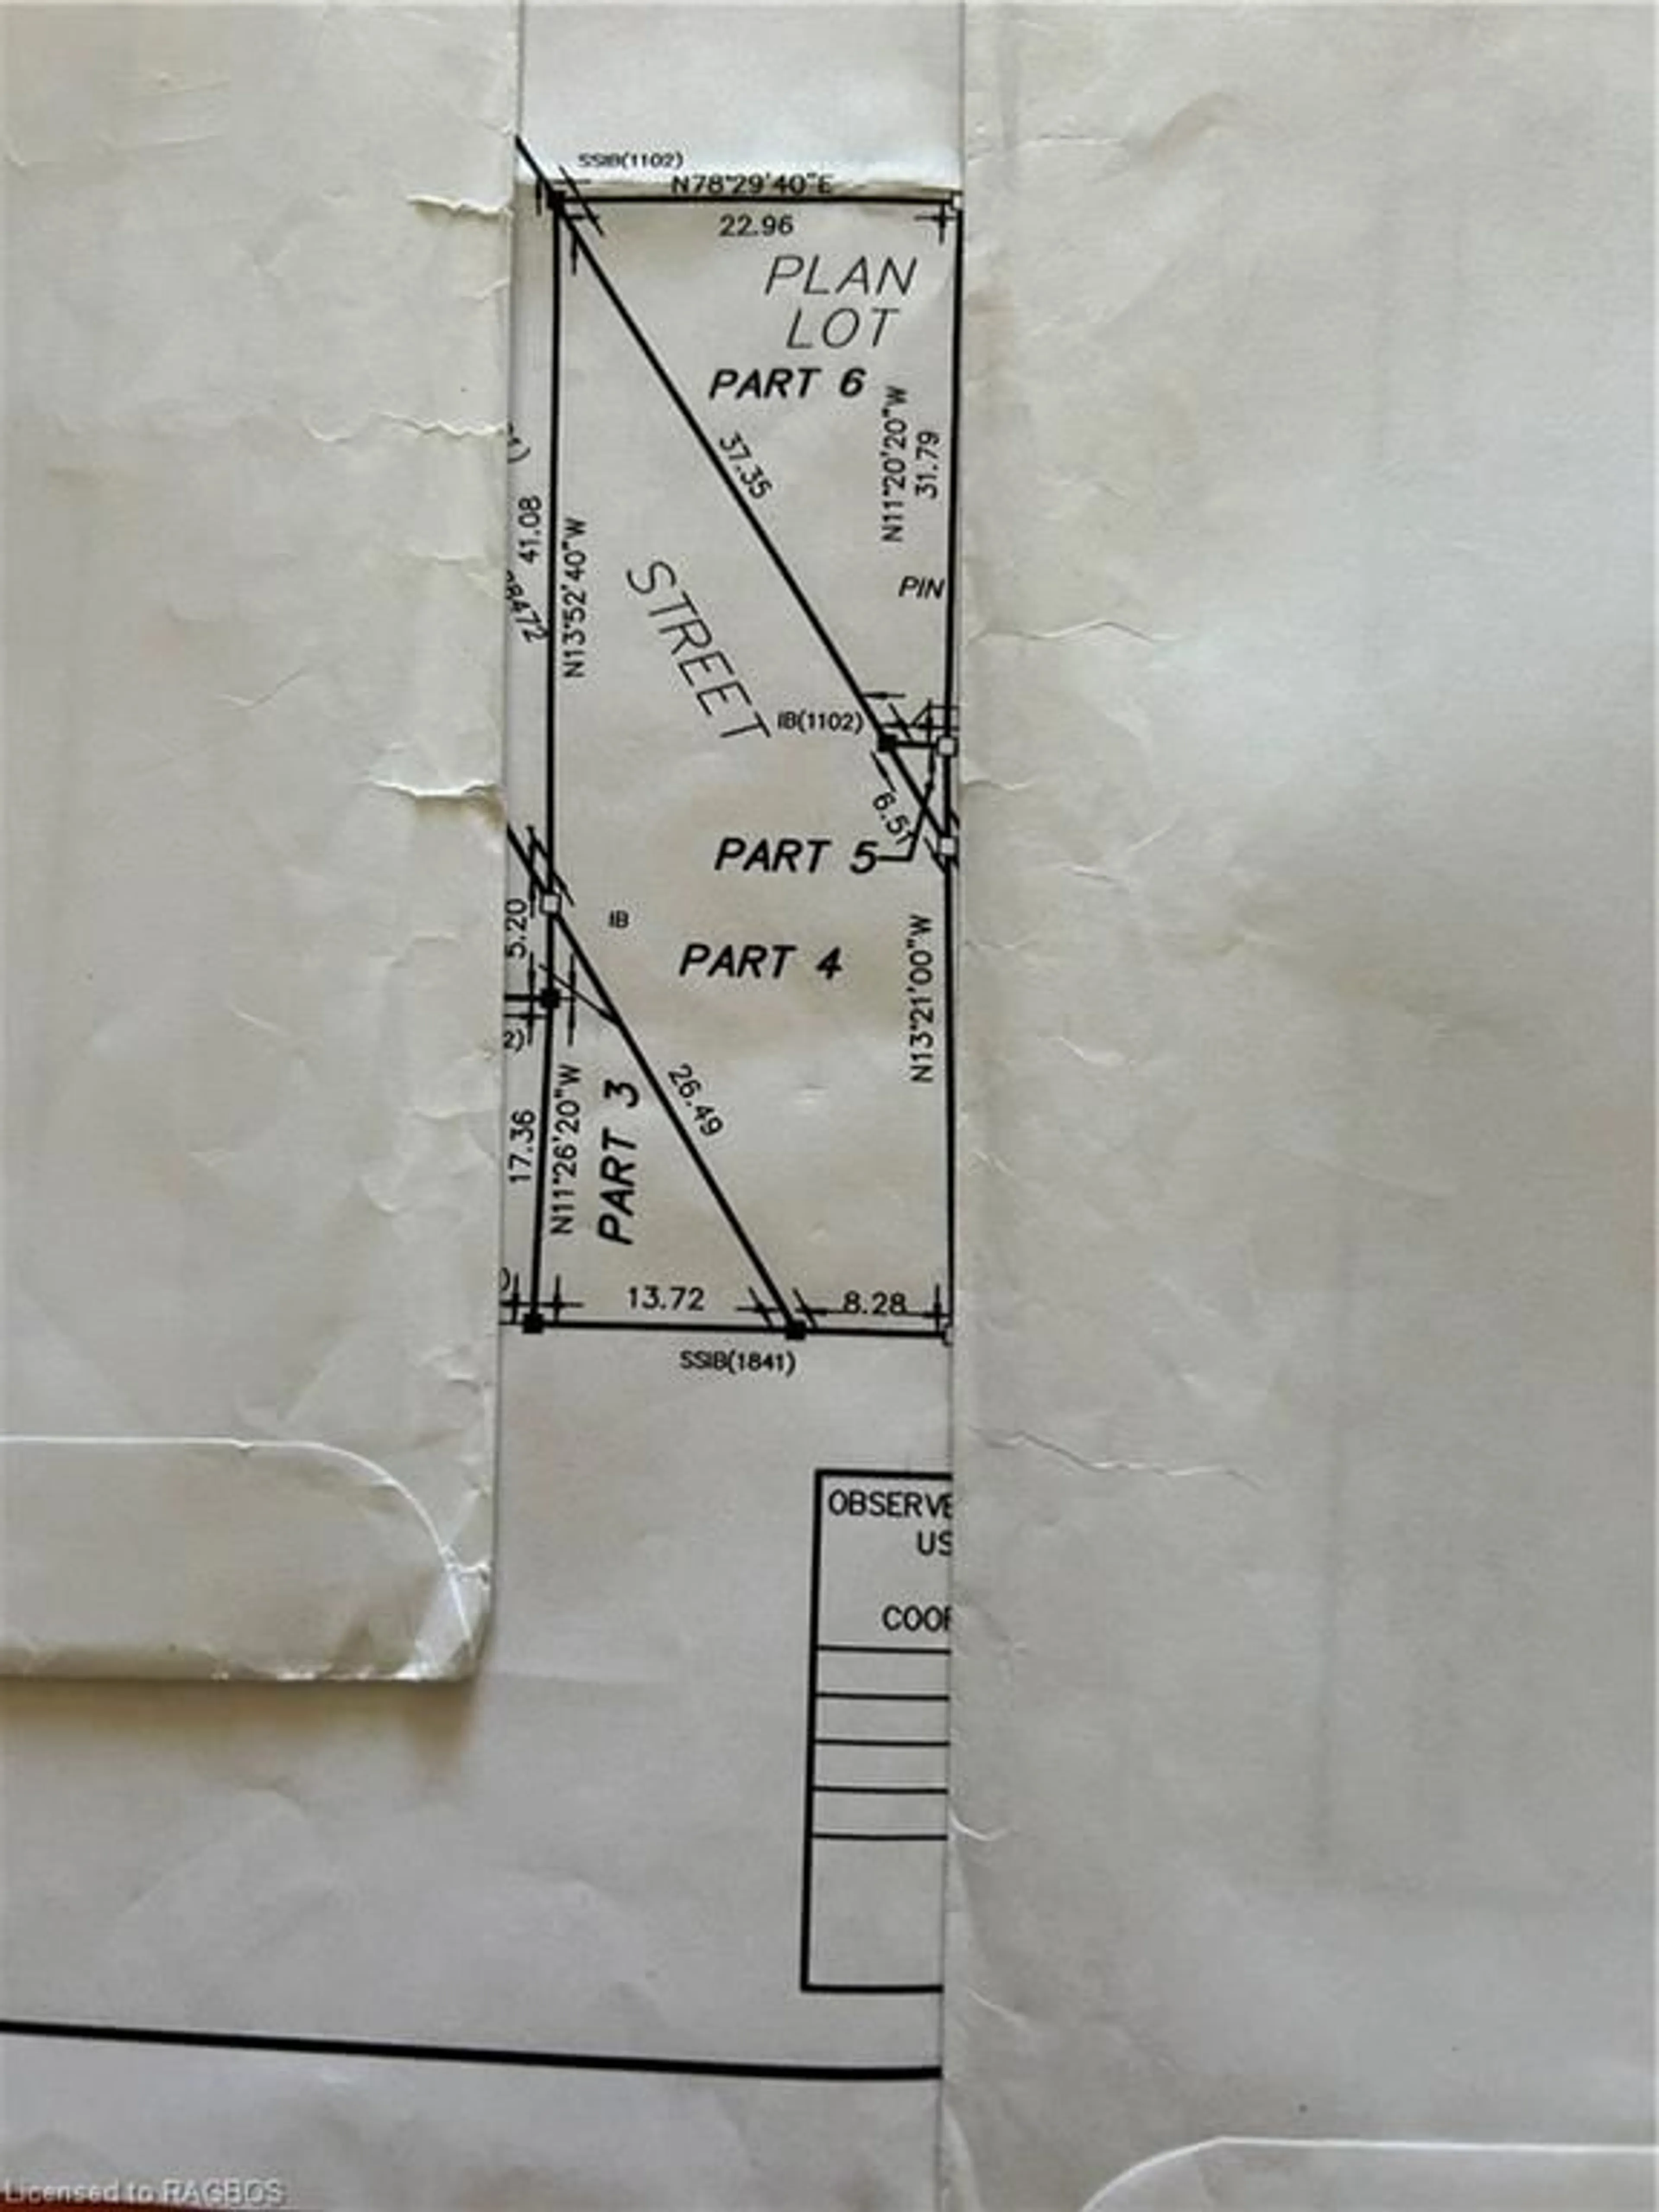 Floor plan for LOT 6 AND 7 North Ave, Tara Ontario N0H 2N0